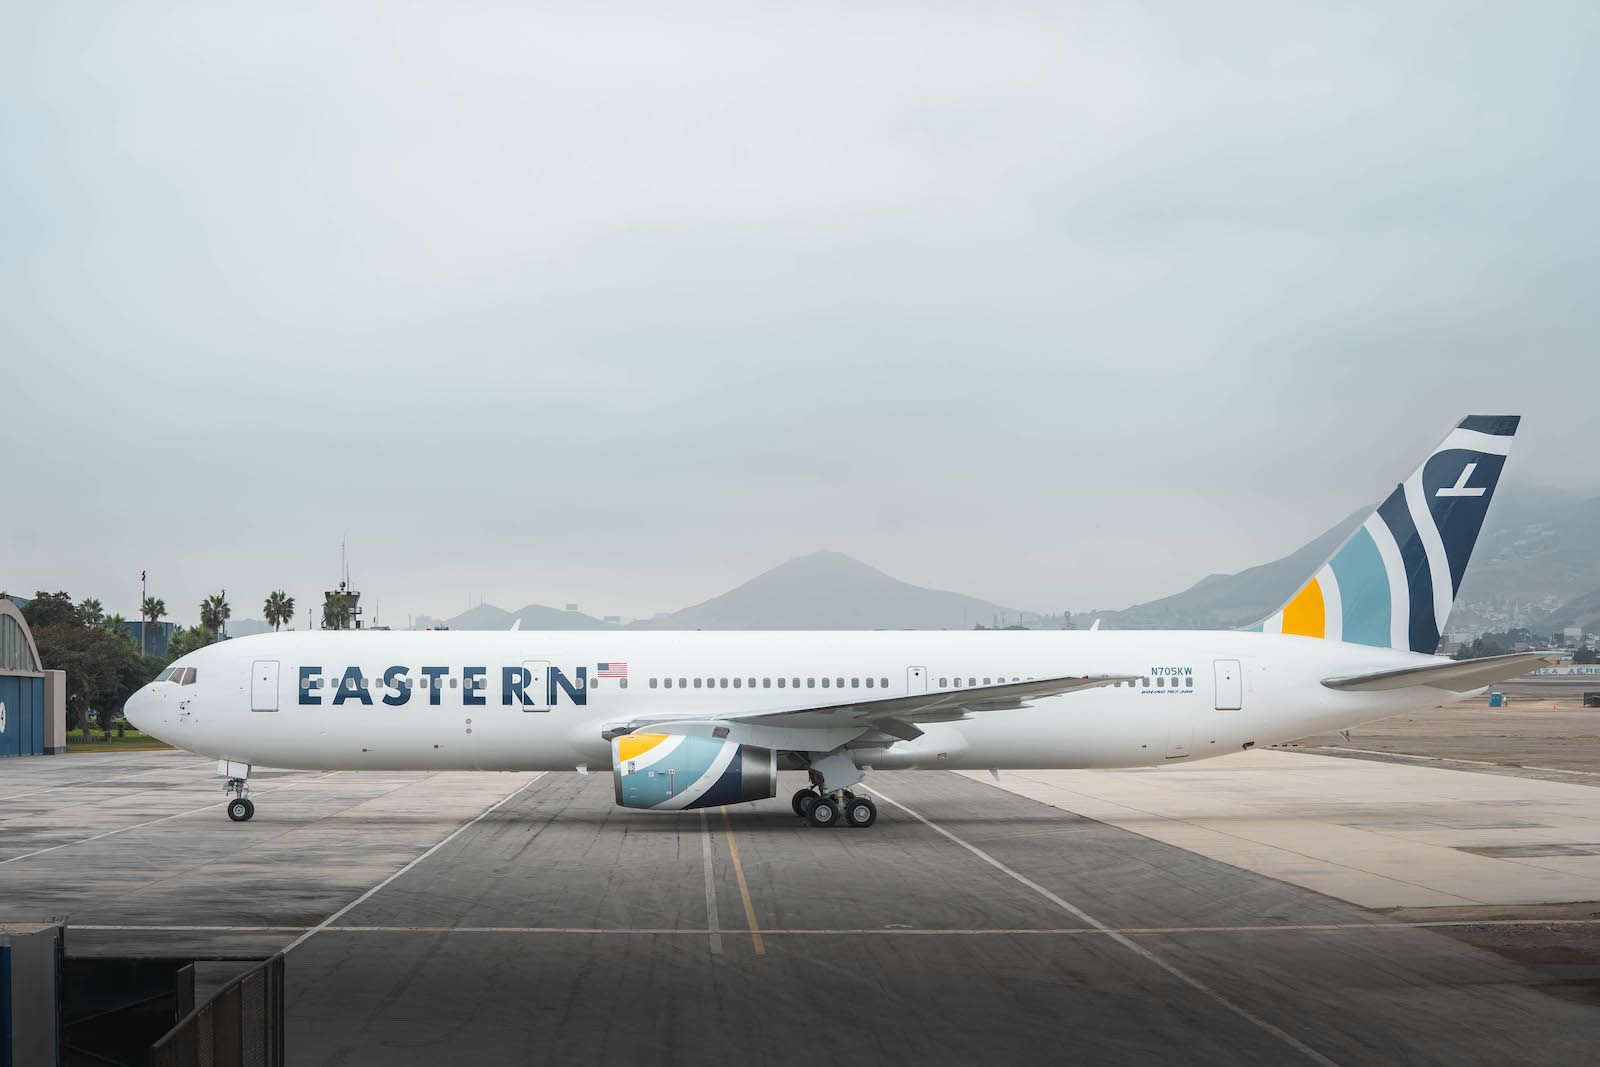 Eastern Airlines Boeing 767 on ramp at airport